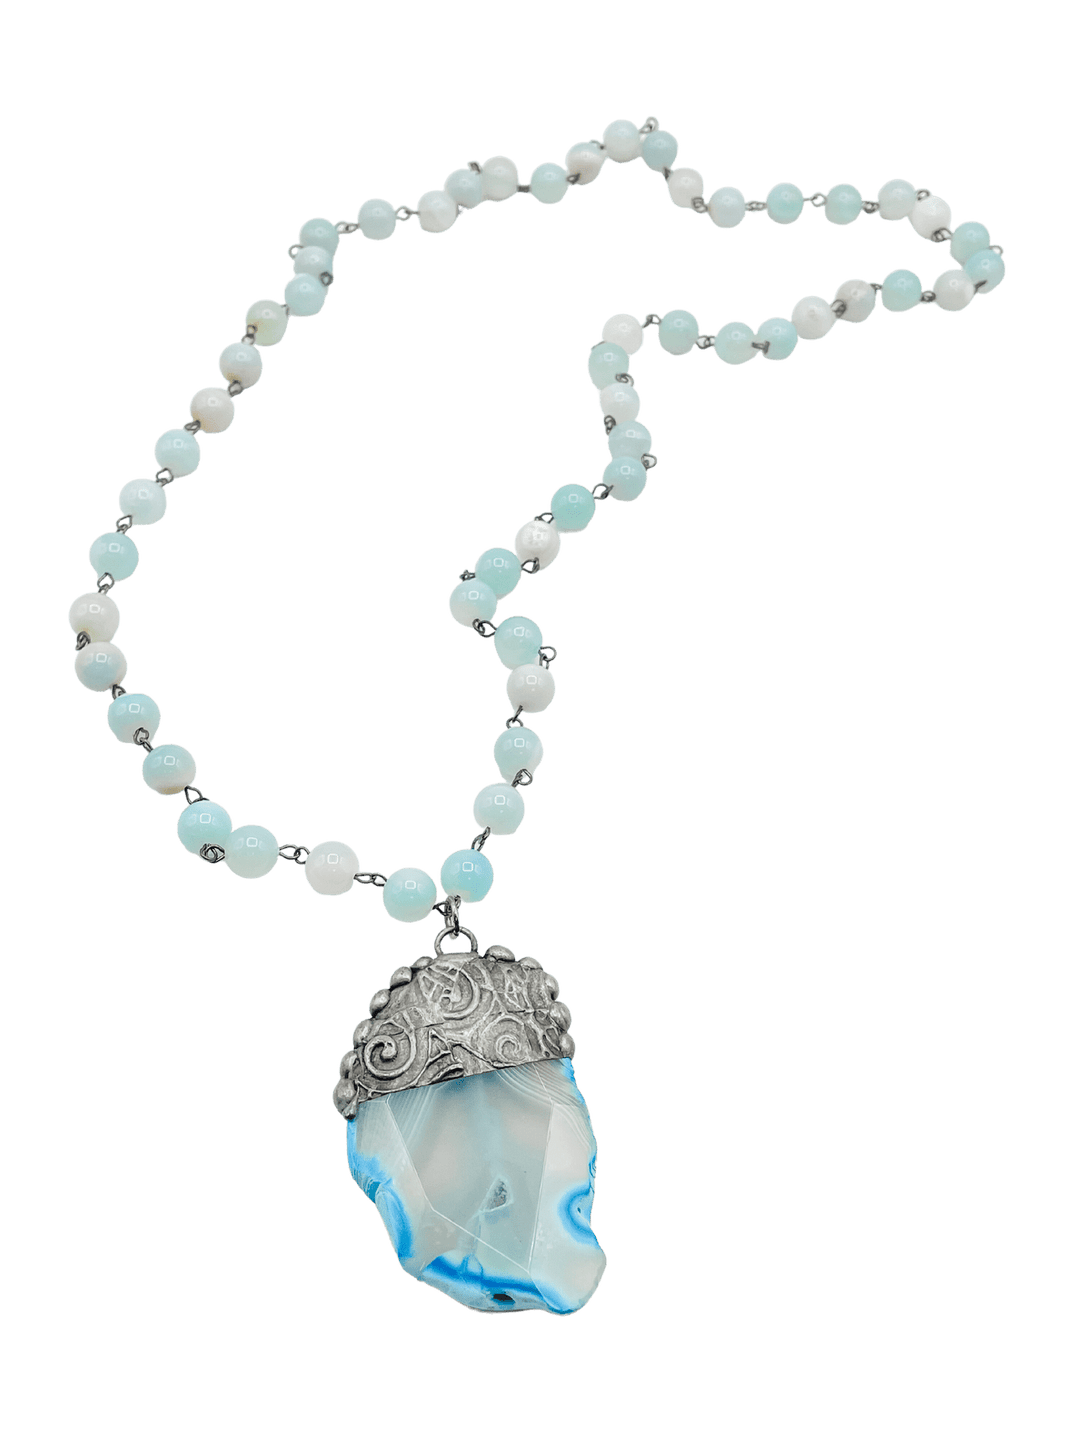 Necklace with Large Beads in Blues and Greens and Amazing Stone Pendant